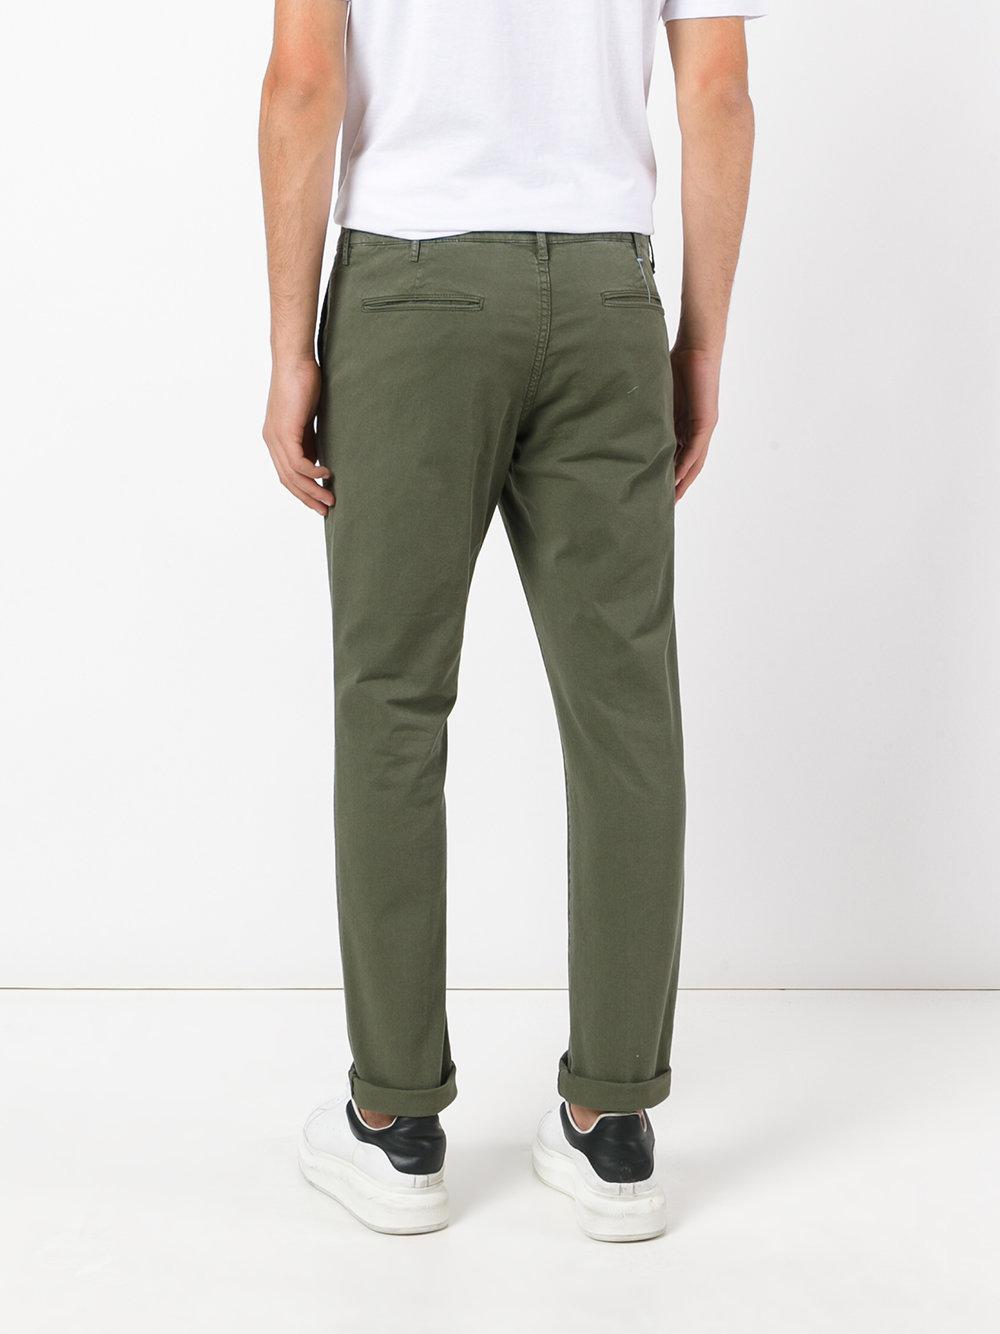 Pence Cotton Classic Chinos in Green for Men - Lyst